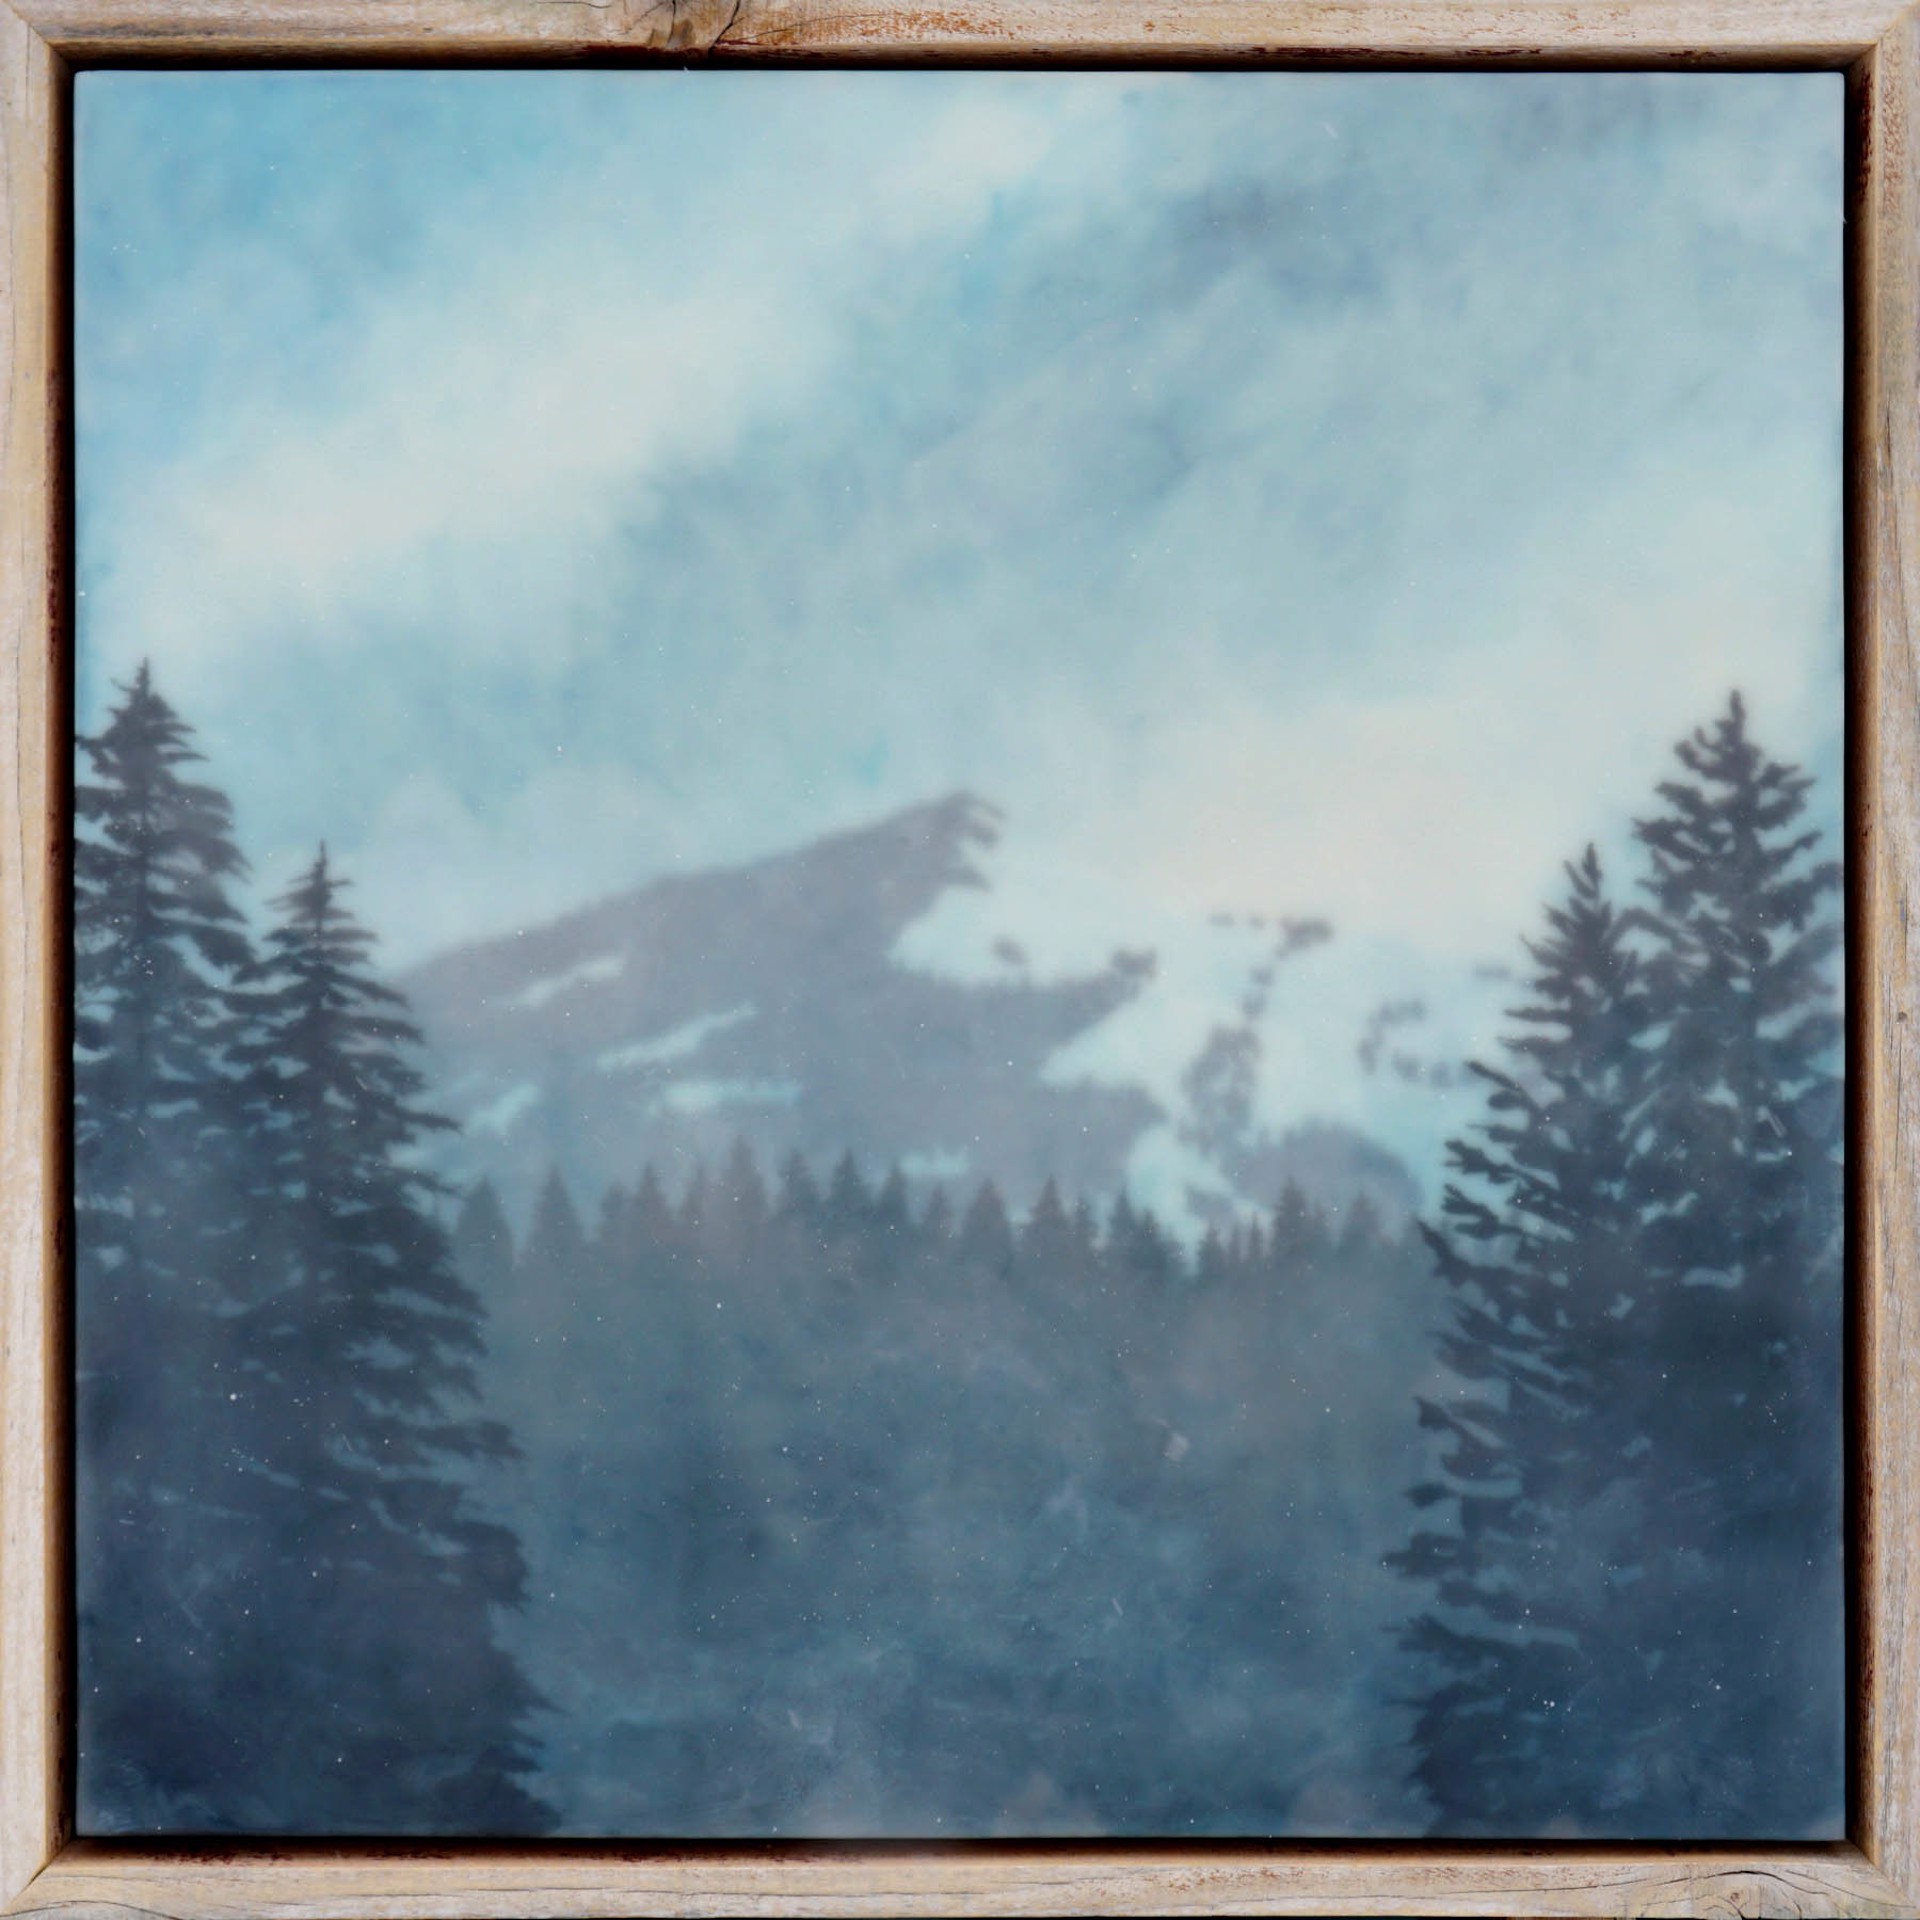 Original Encaustic Landscape Painting Featuring One Mountain Peak And Pine Trees